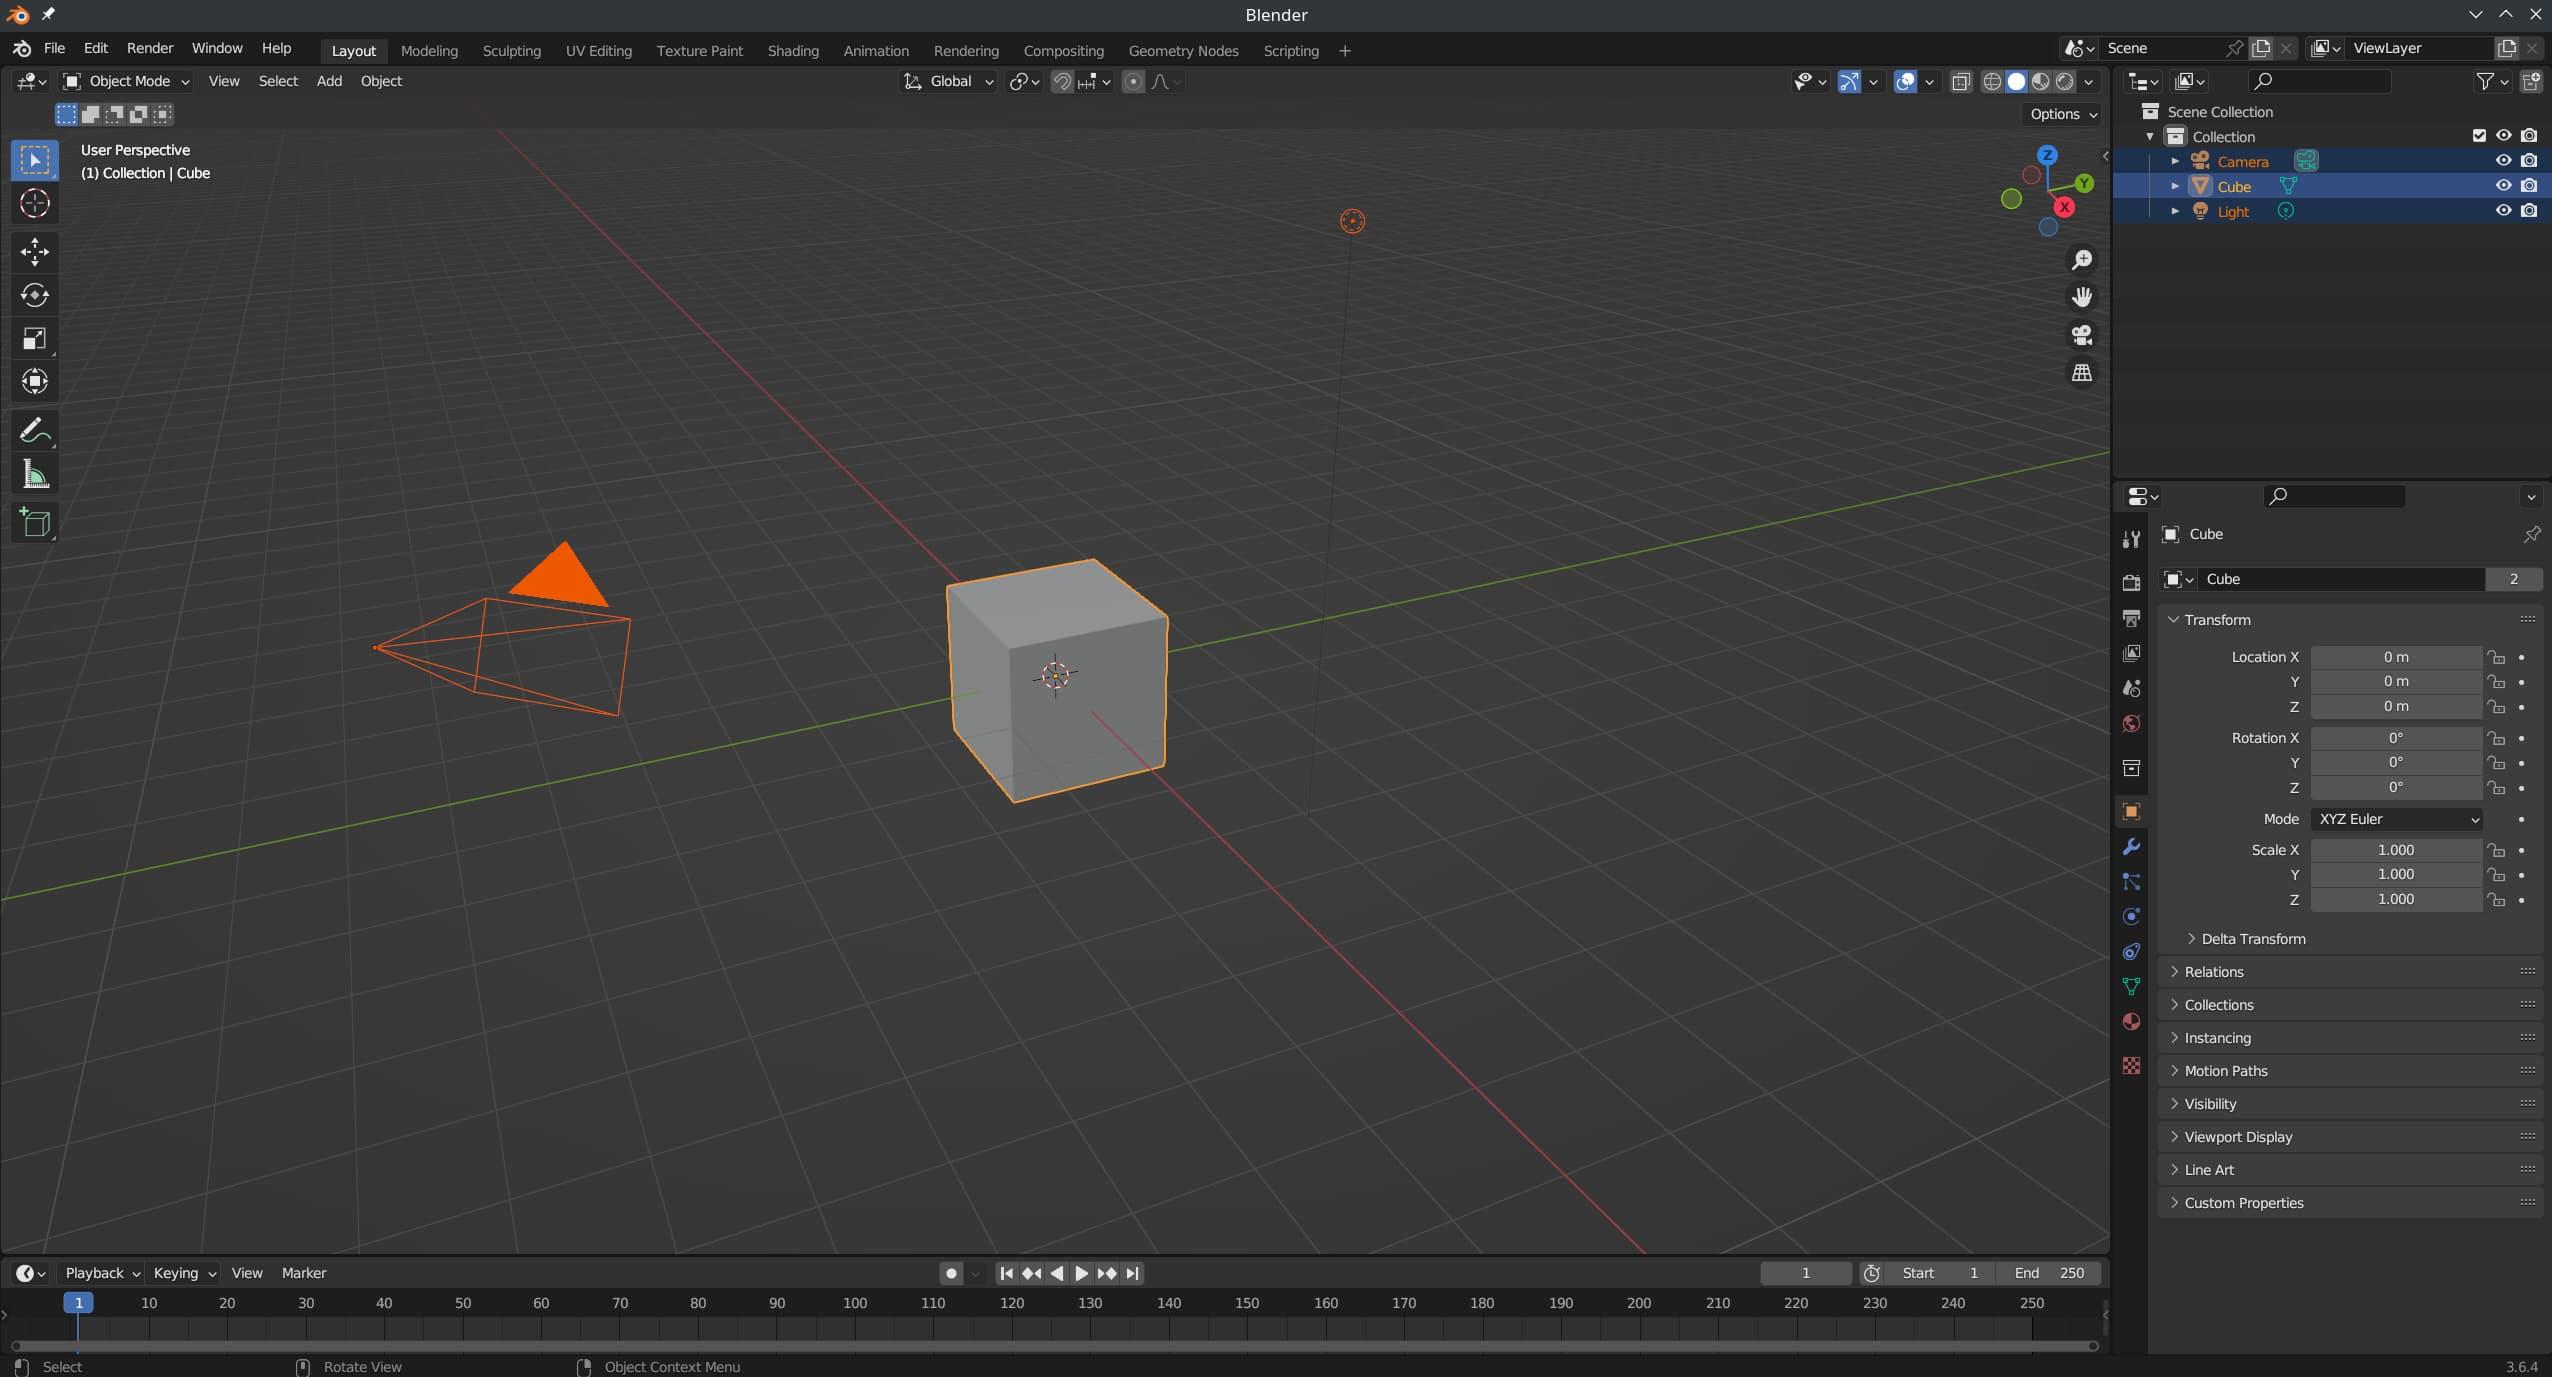 A Blender screenshot shows a grey cube with an orange outline, and two orange shapes representing a camera and a light